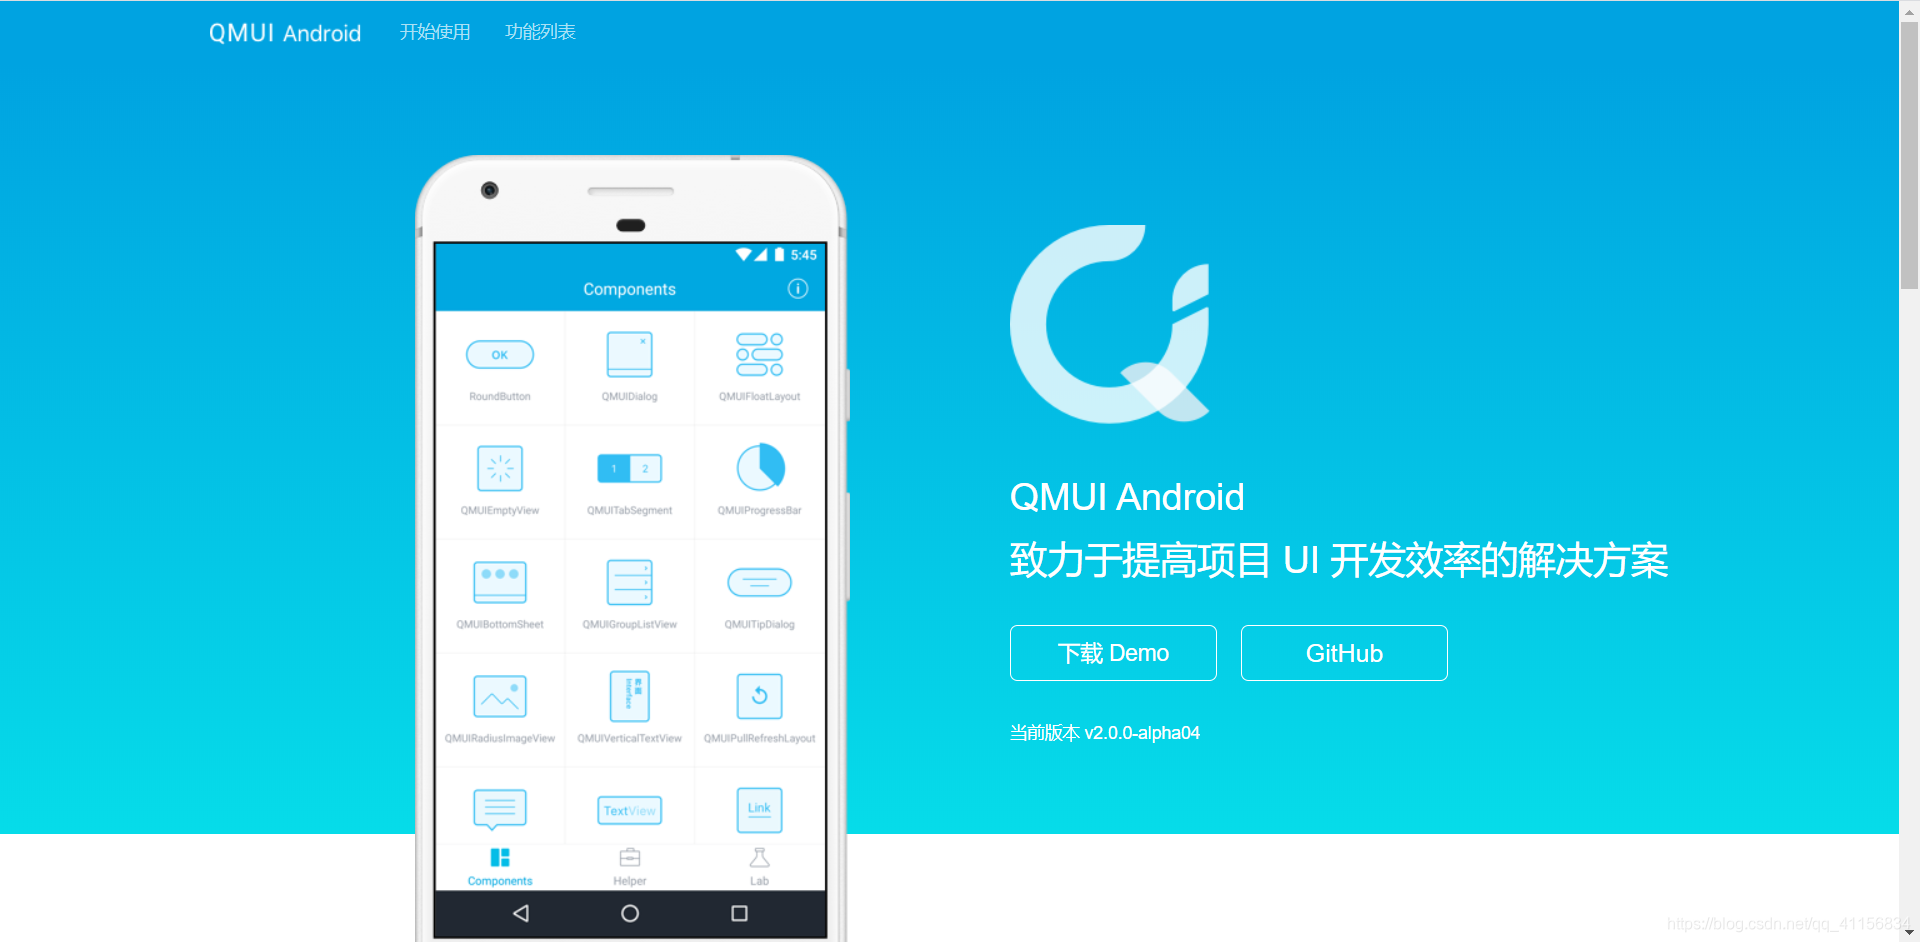 QMUI Android